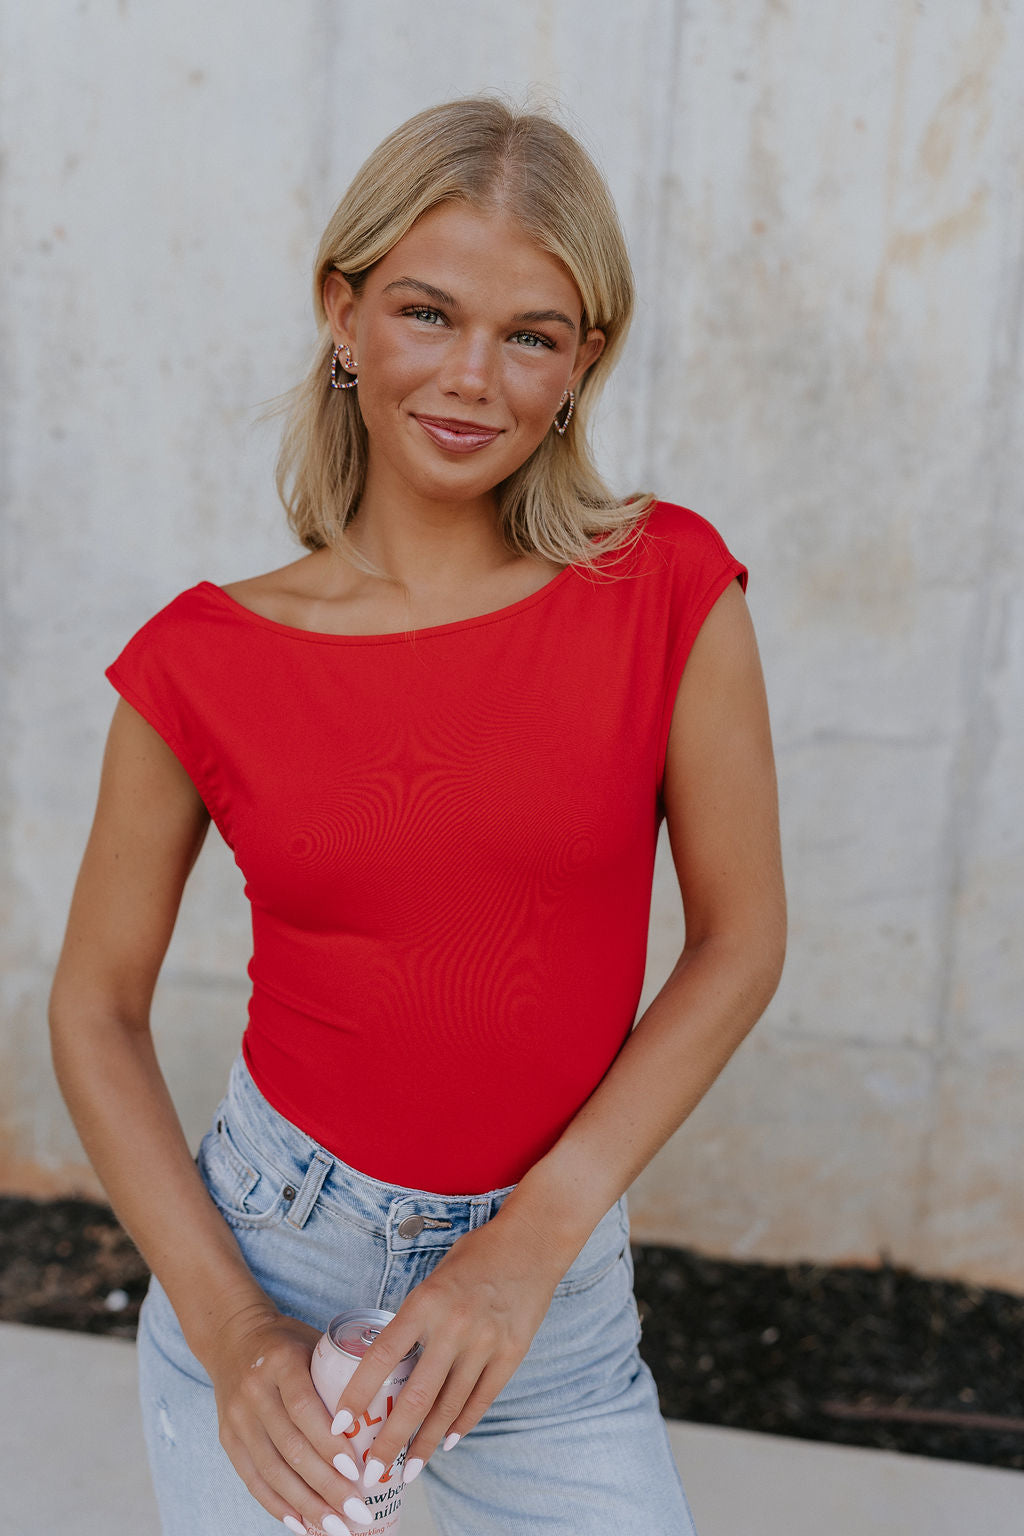 Upper body front view of female model wearing the Ryleigh Red Backless Bodysuit that has red knit fabric, an open back, and a scoop neckline. Worn with jeans.